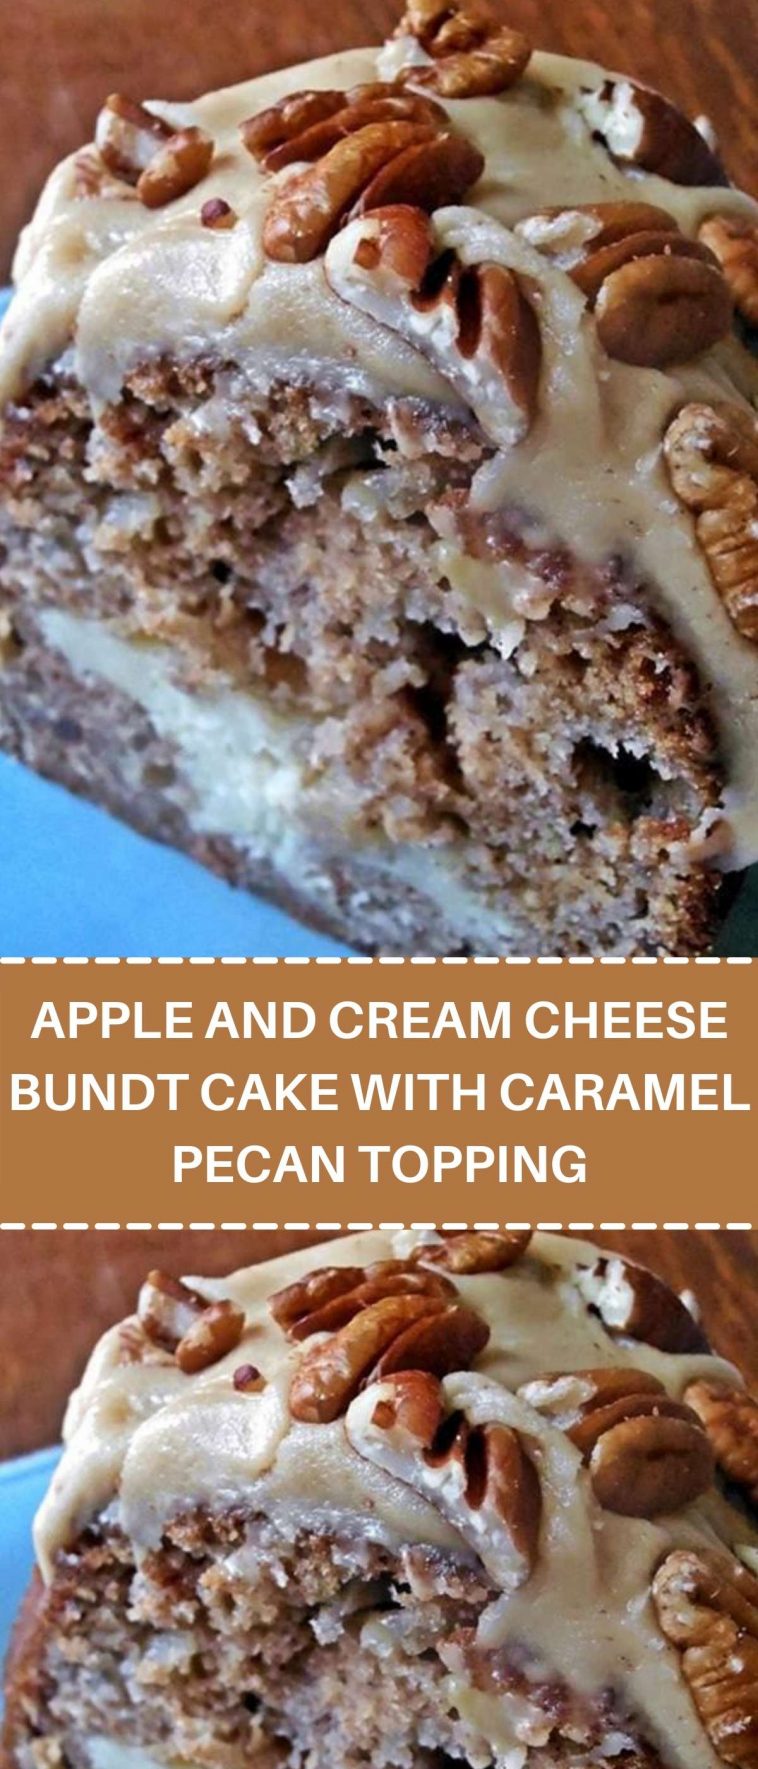 APPLE AND CREAM CHEESE BUNDT CAKE WITH CARAMEL PECAN TOPPING